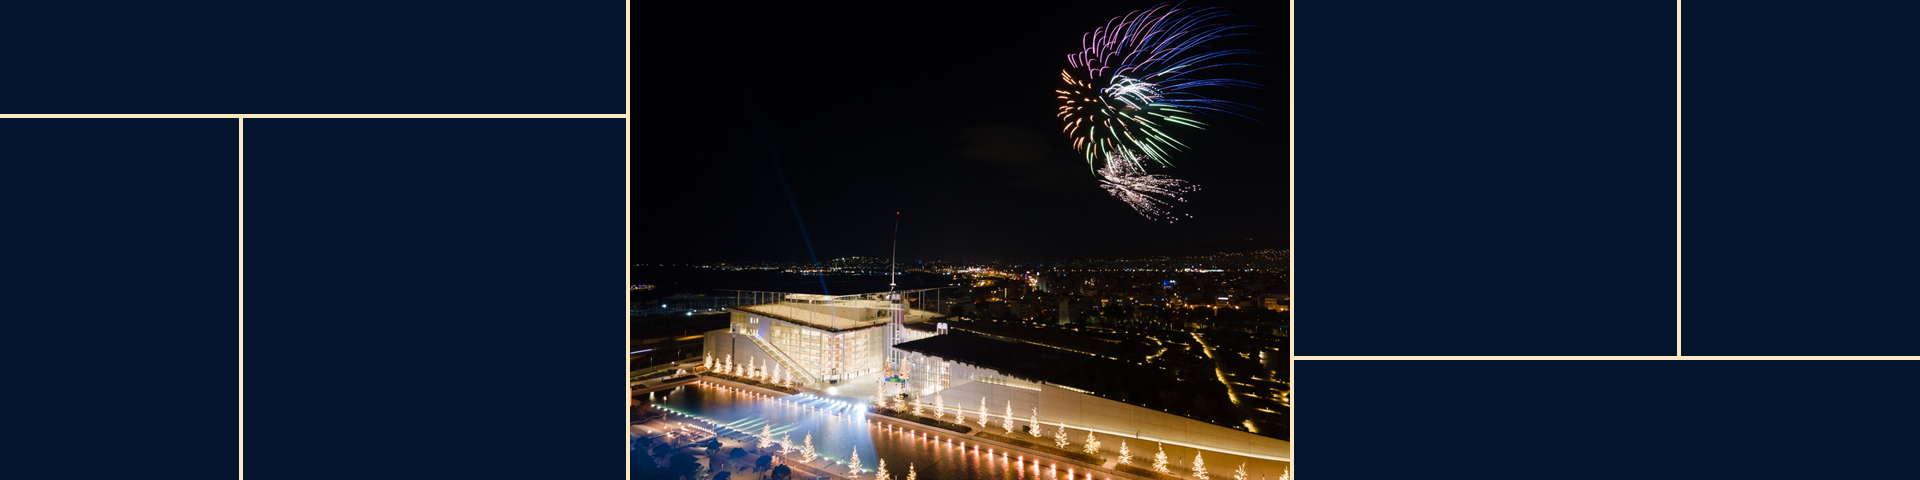 Stavros Niarchos Foundation Cultural Center welcomes 2021 with music and fireworks - Εικόνα